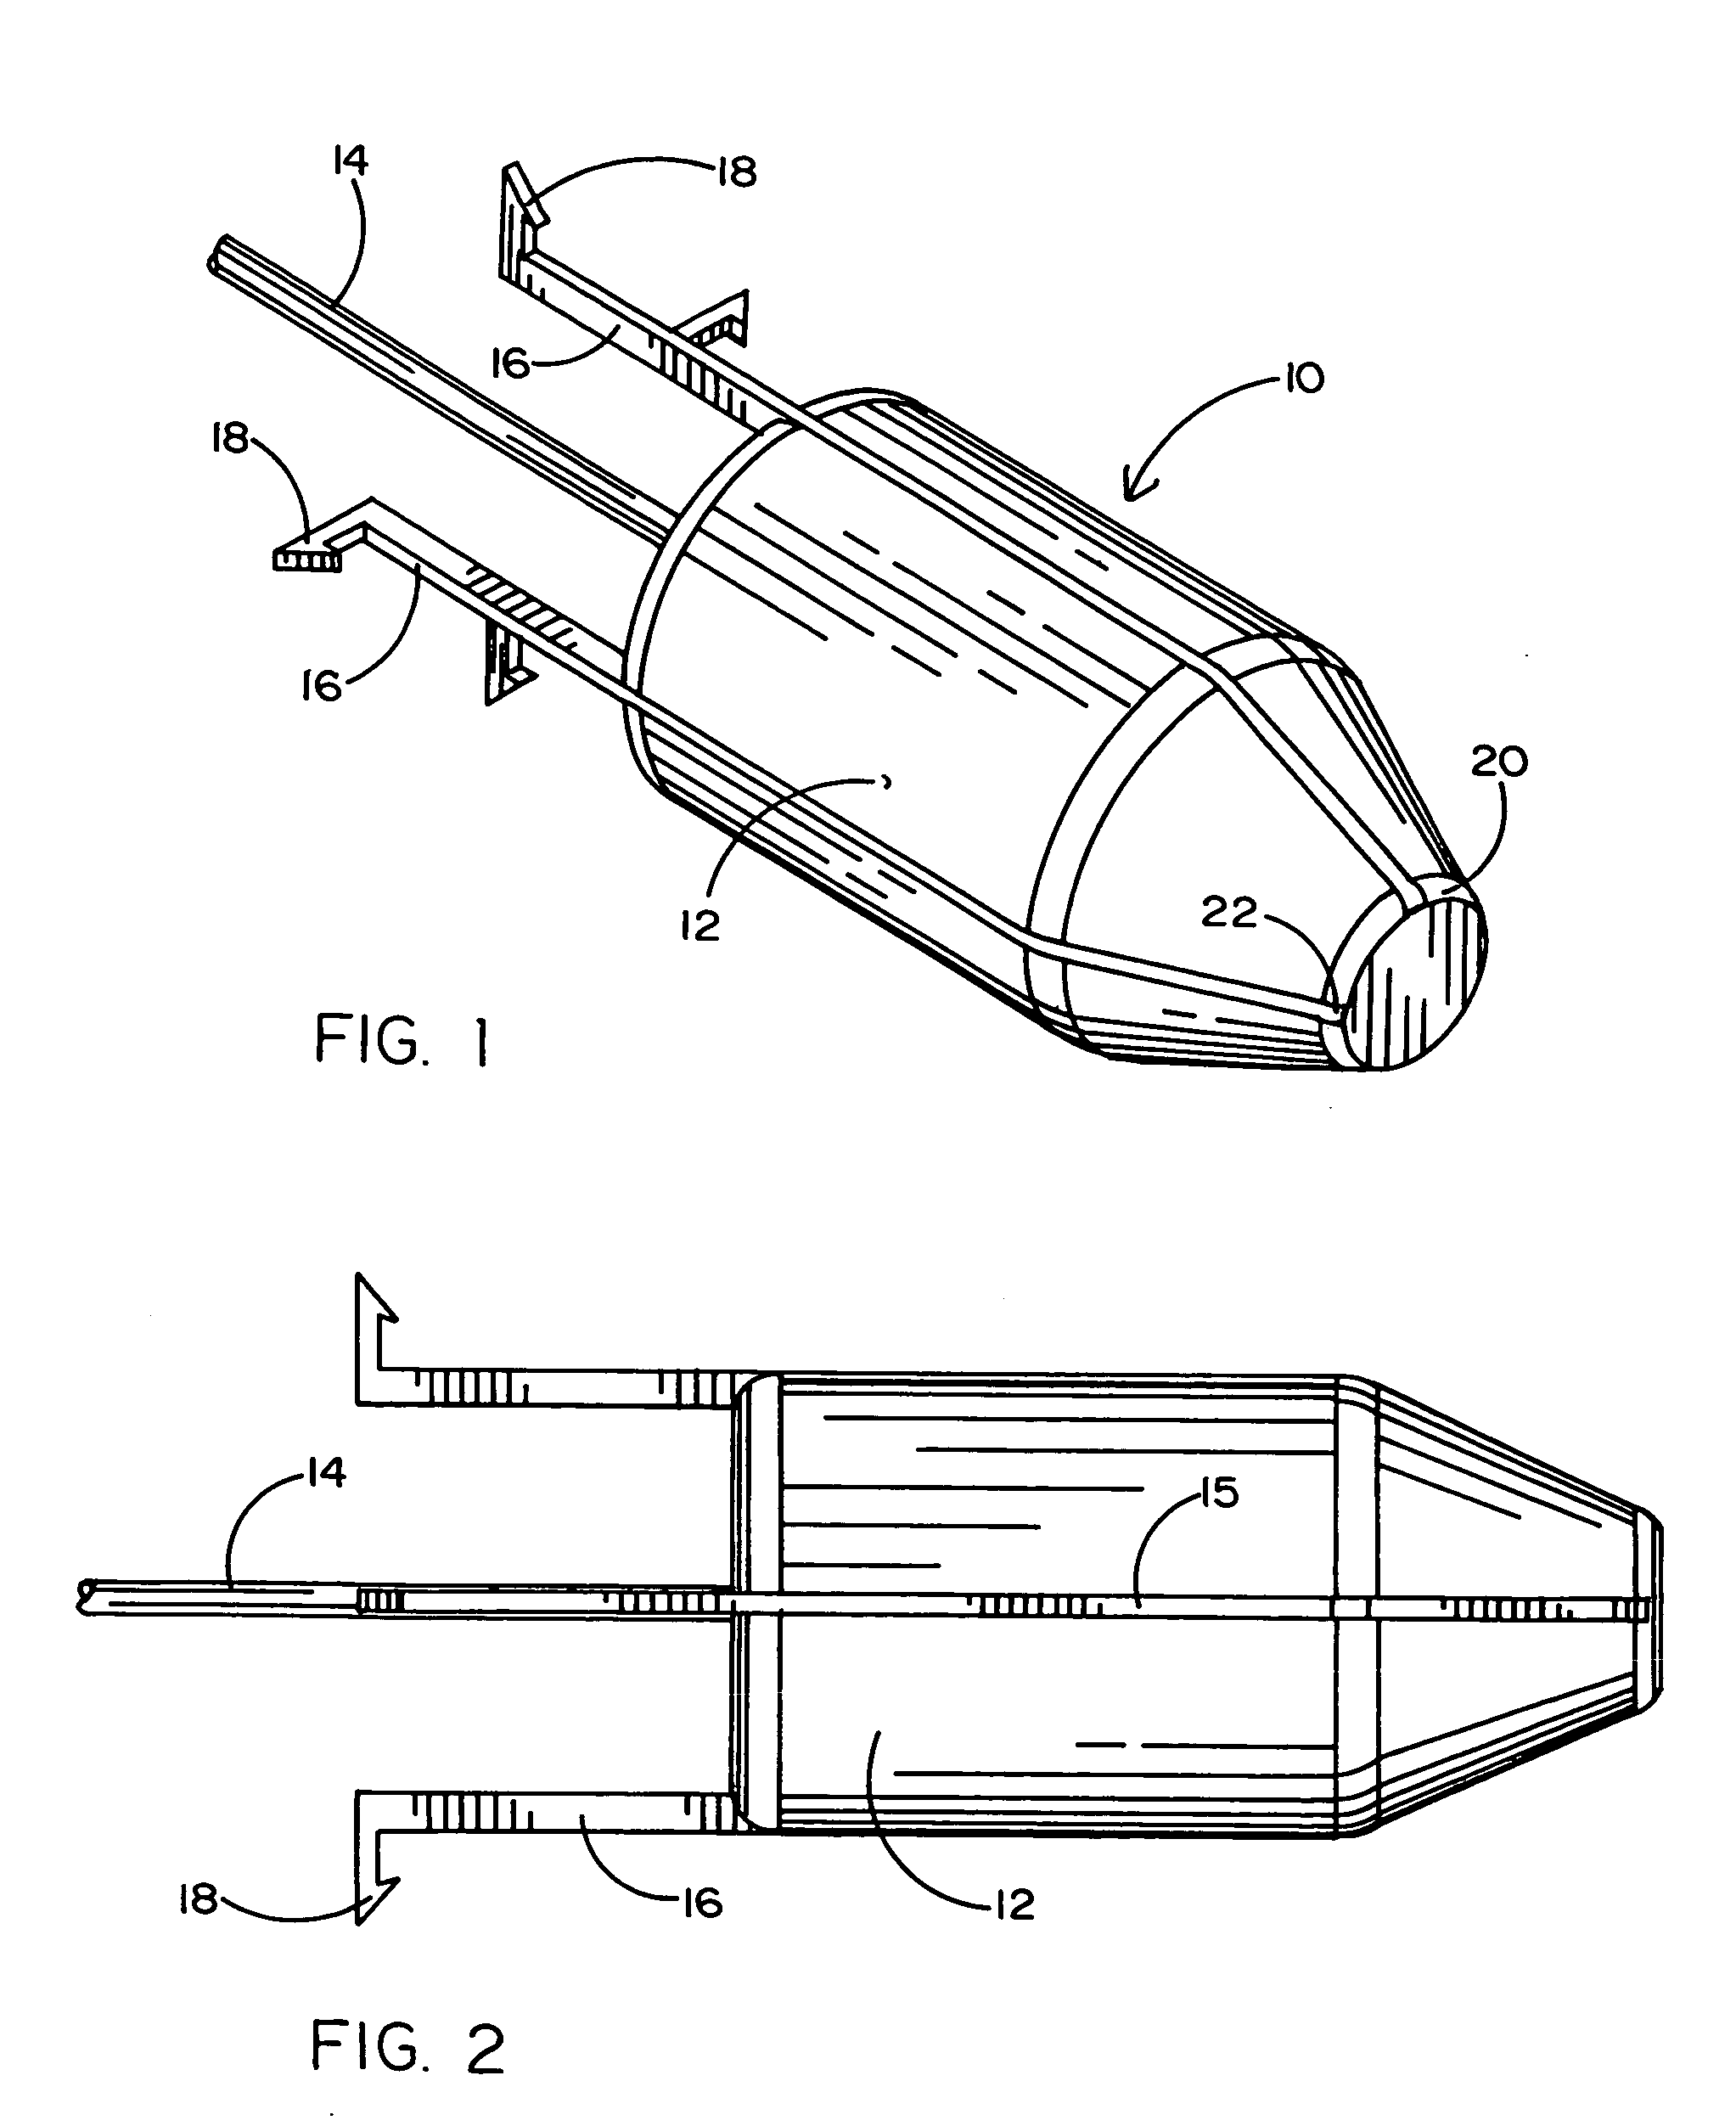 Electrical discharge immobilization weapon projectile having multiple deployed contacts